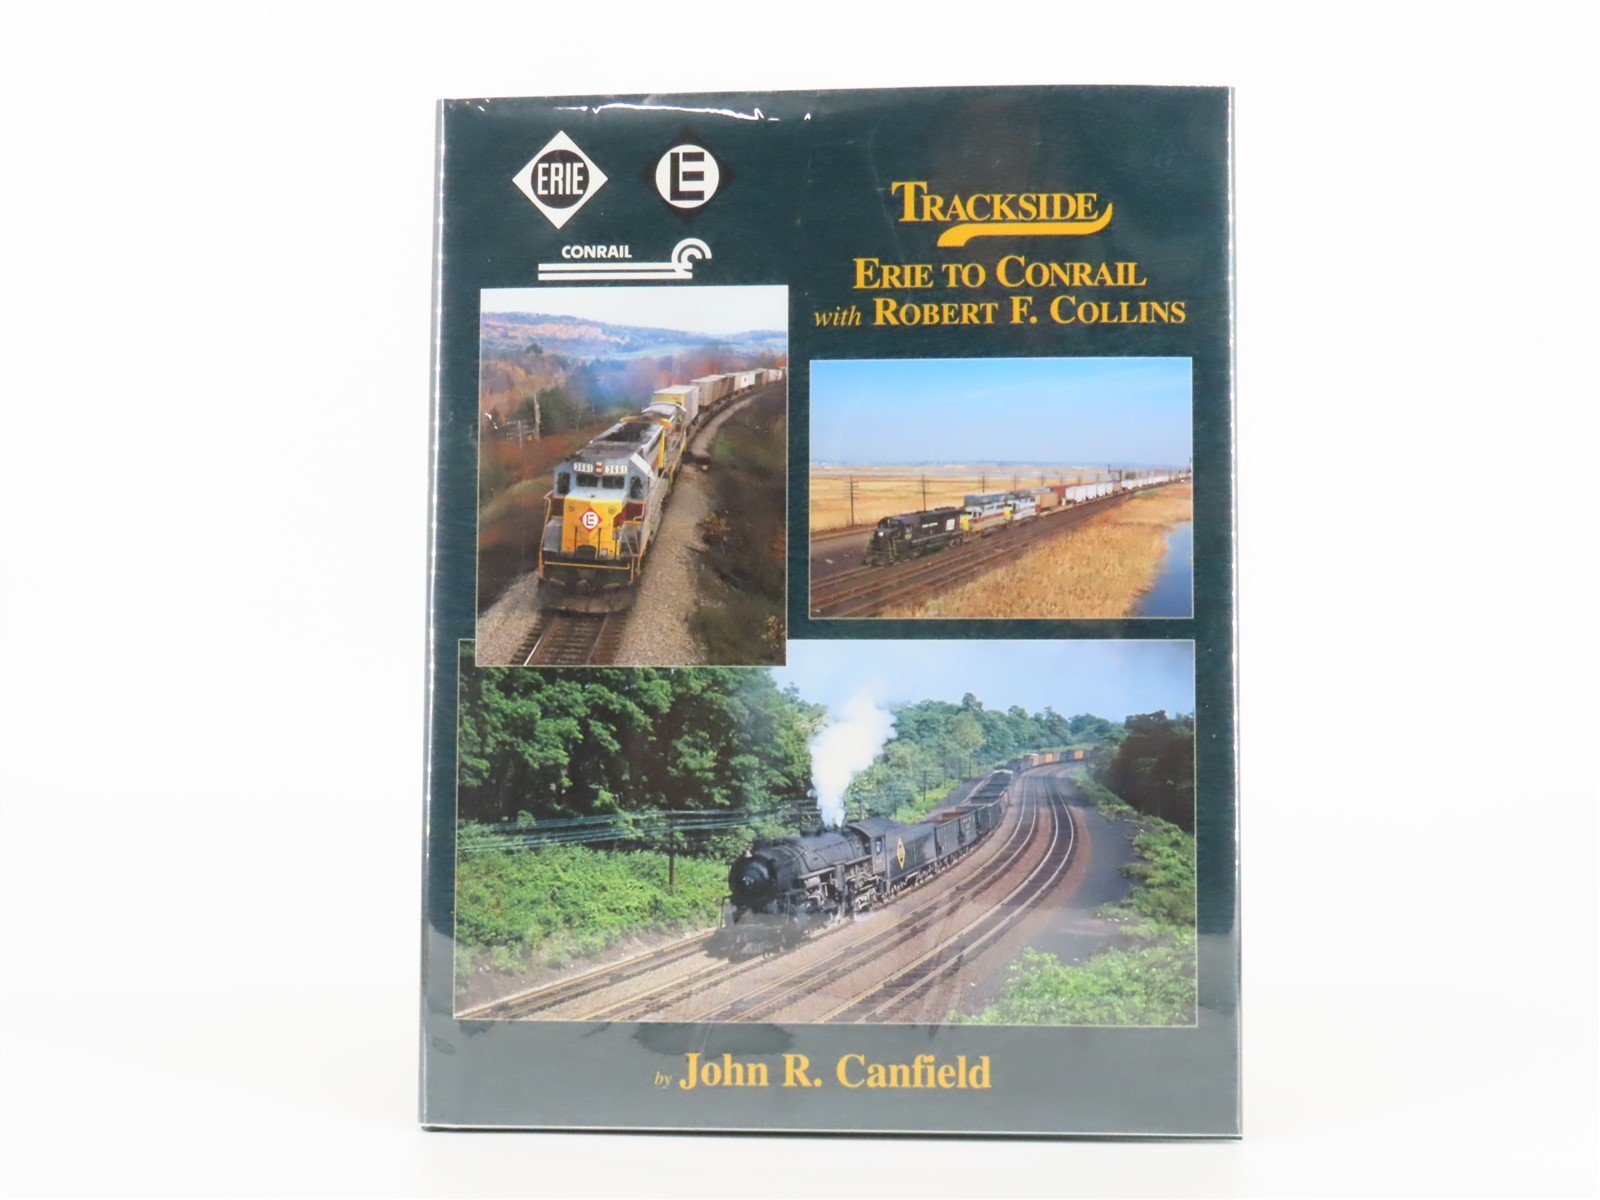 Morning Sun: Trackside Erie To Conrail w/ Robert F. Collins by John R. Canfield